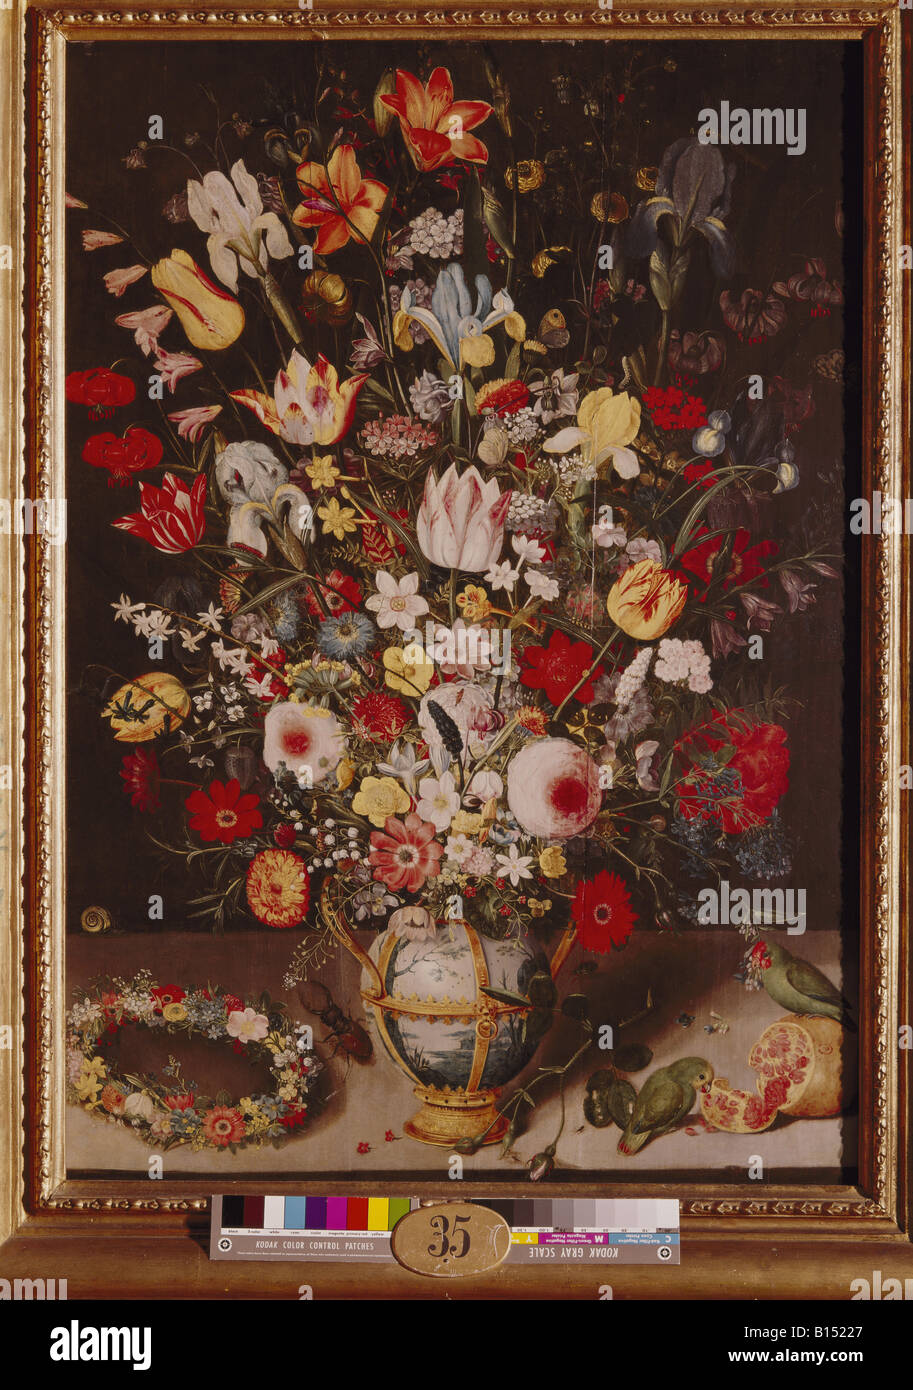 fine arts, Binoit, Peter, (1560 - 1632), painting, 'Vase with Flowers', Pommersfelden, Germany, circa 1620, Artist's Copyright has not to be cleared Stock Photo